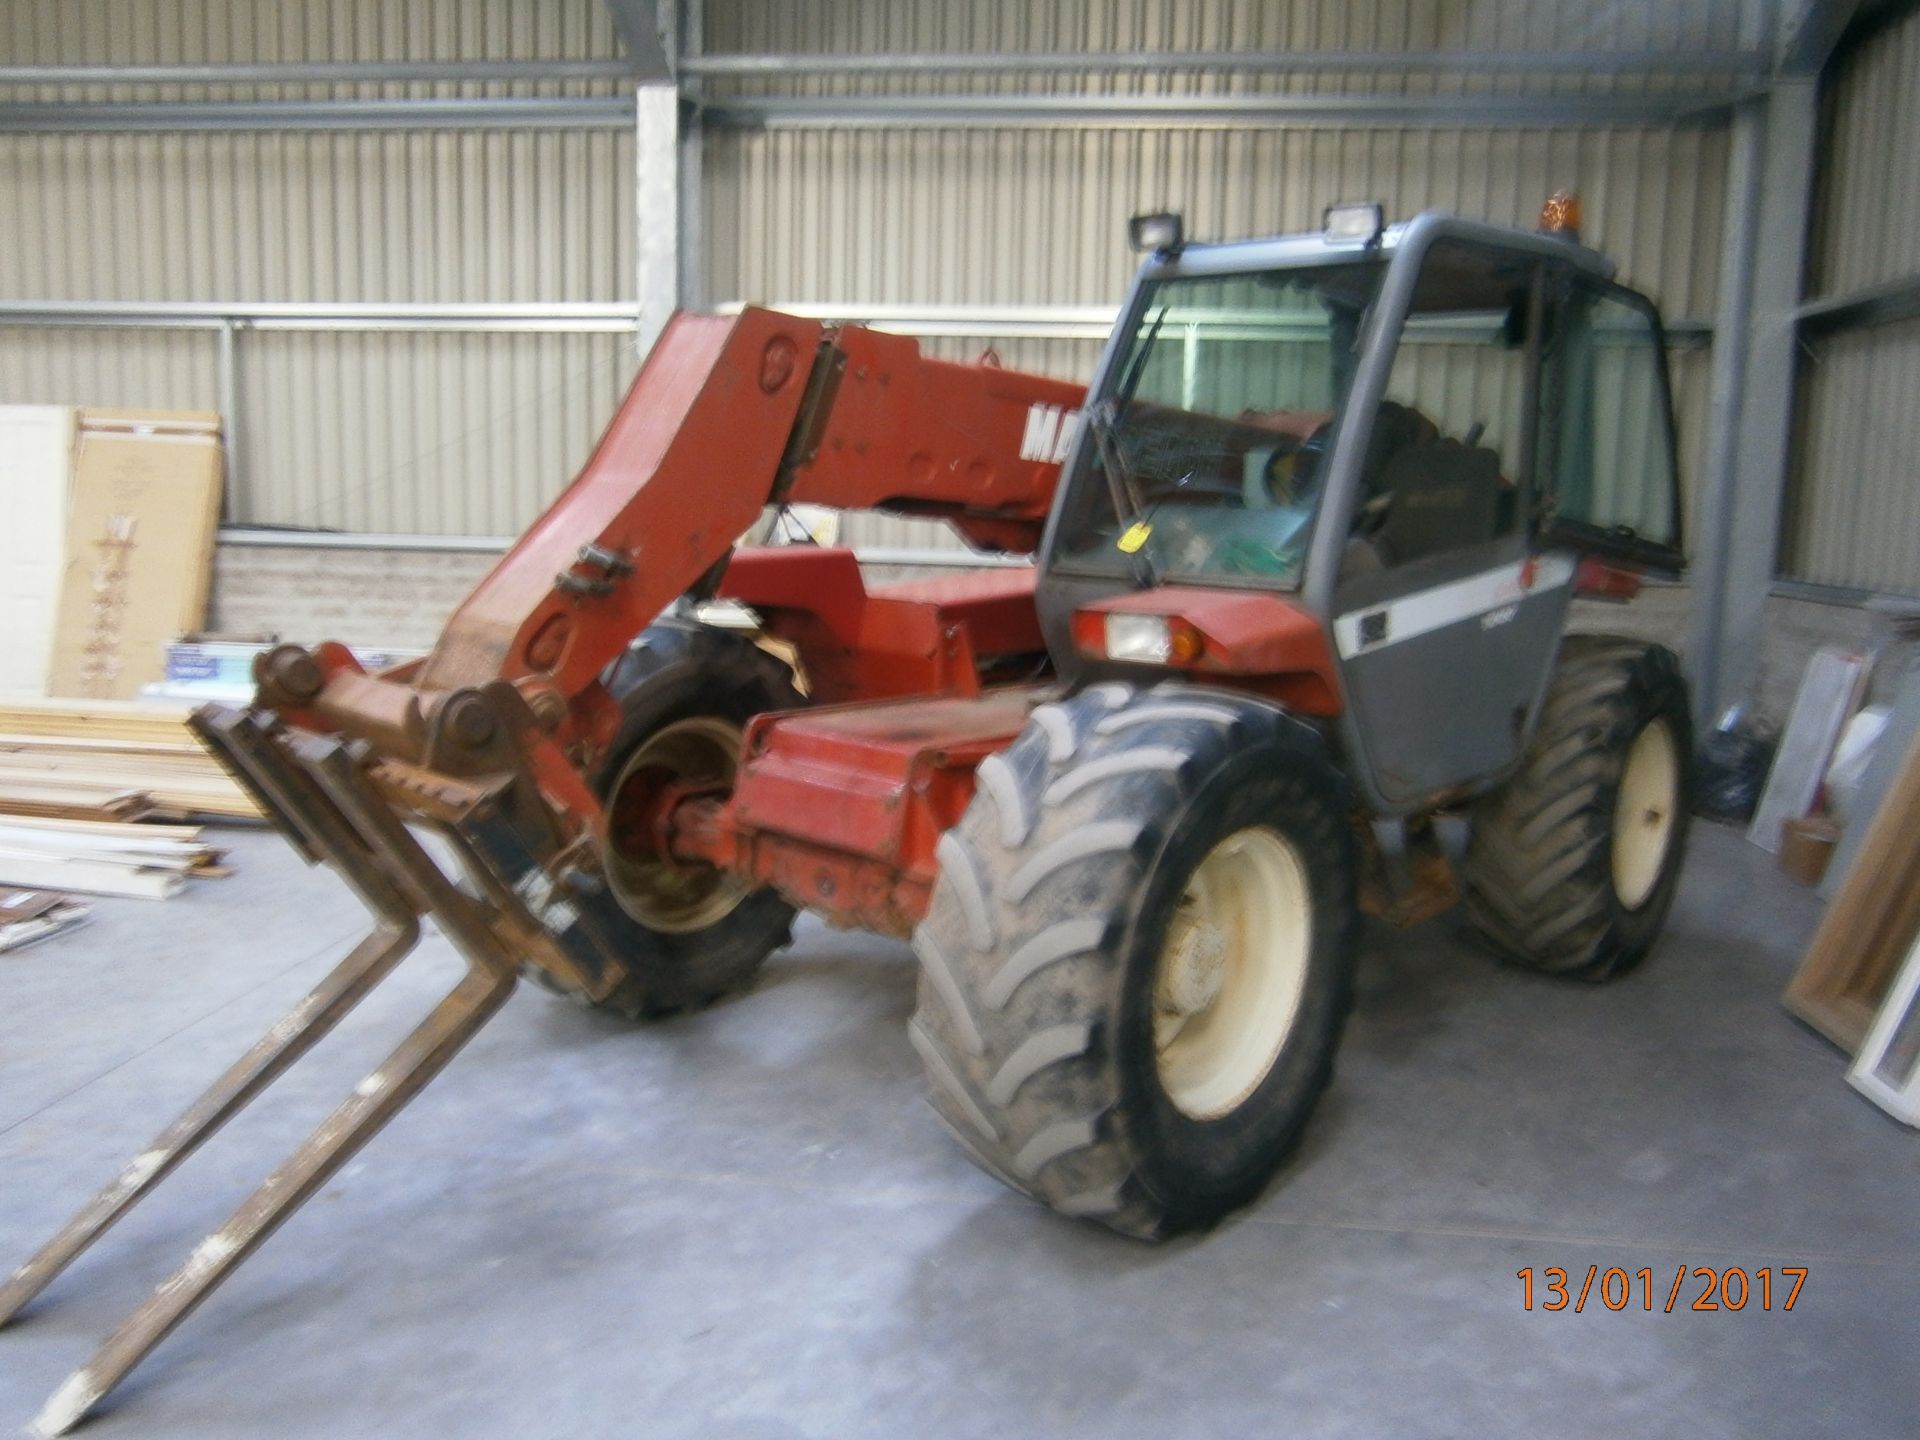 1 No. P846 FTS - Manitou MLT628 Turbo Telehandler - cw Manifix Hitch - Displaying 8,246 Hours - - Image 4 of 4